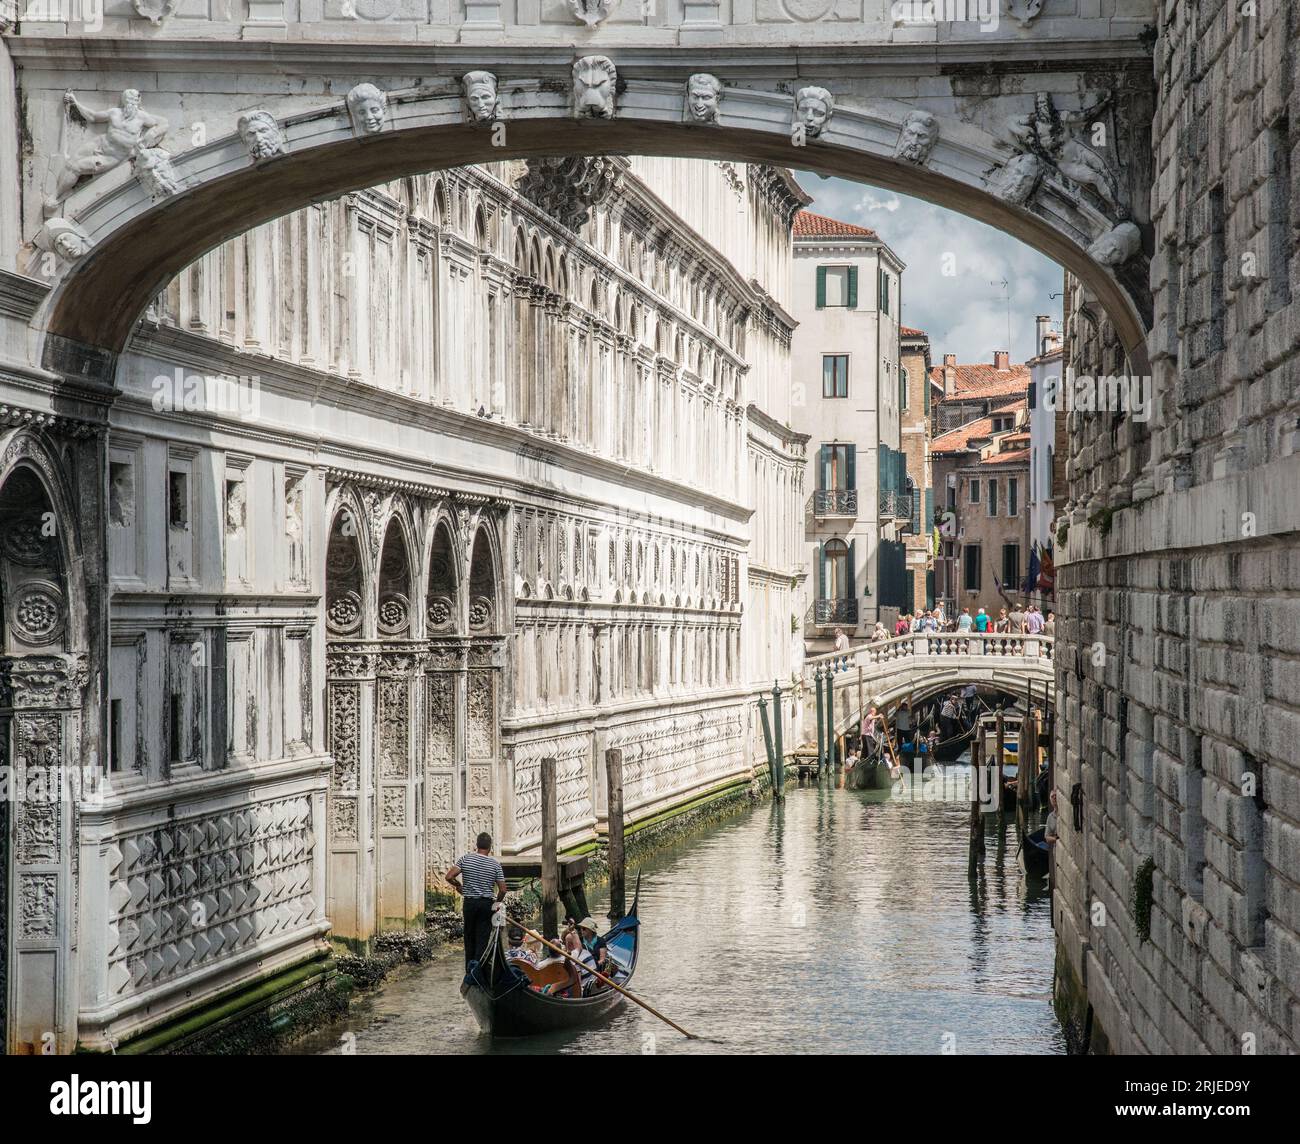 Going under the Bridge Of Sighs in Venice, Italy Stock Photo